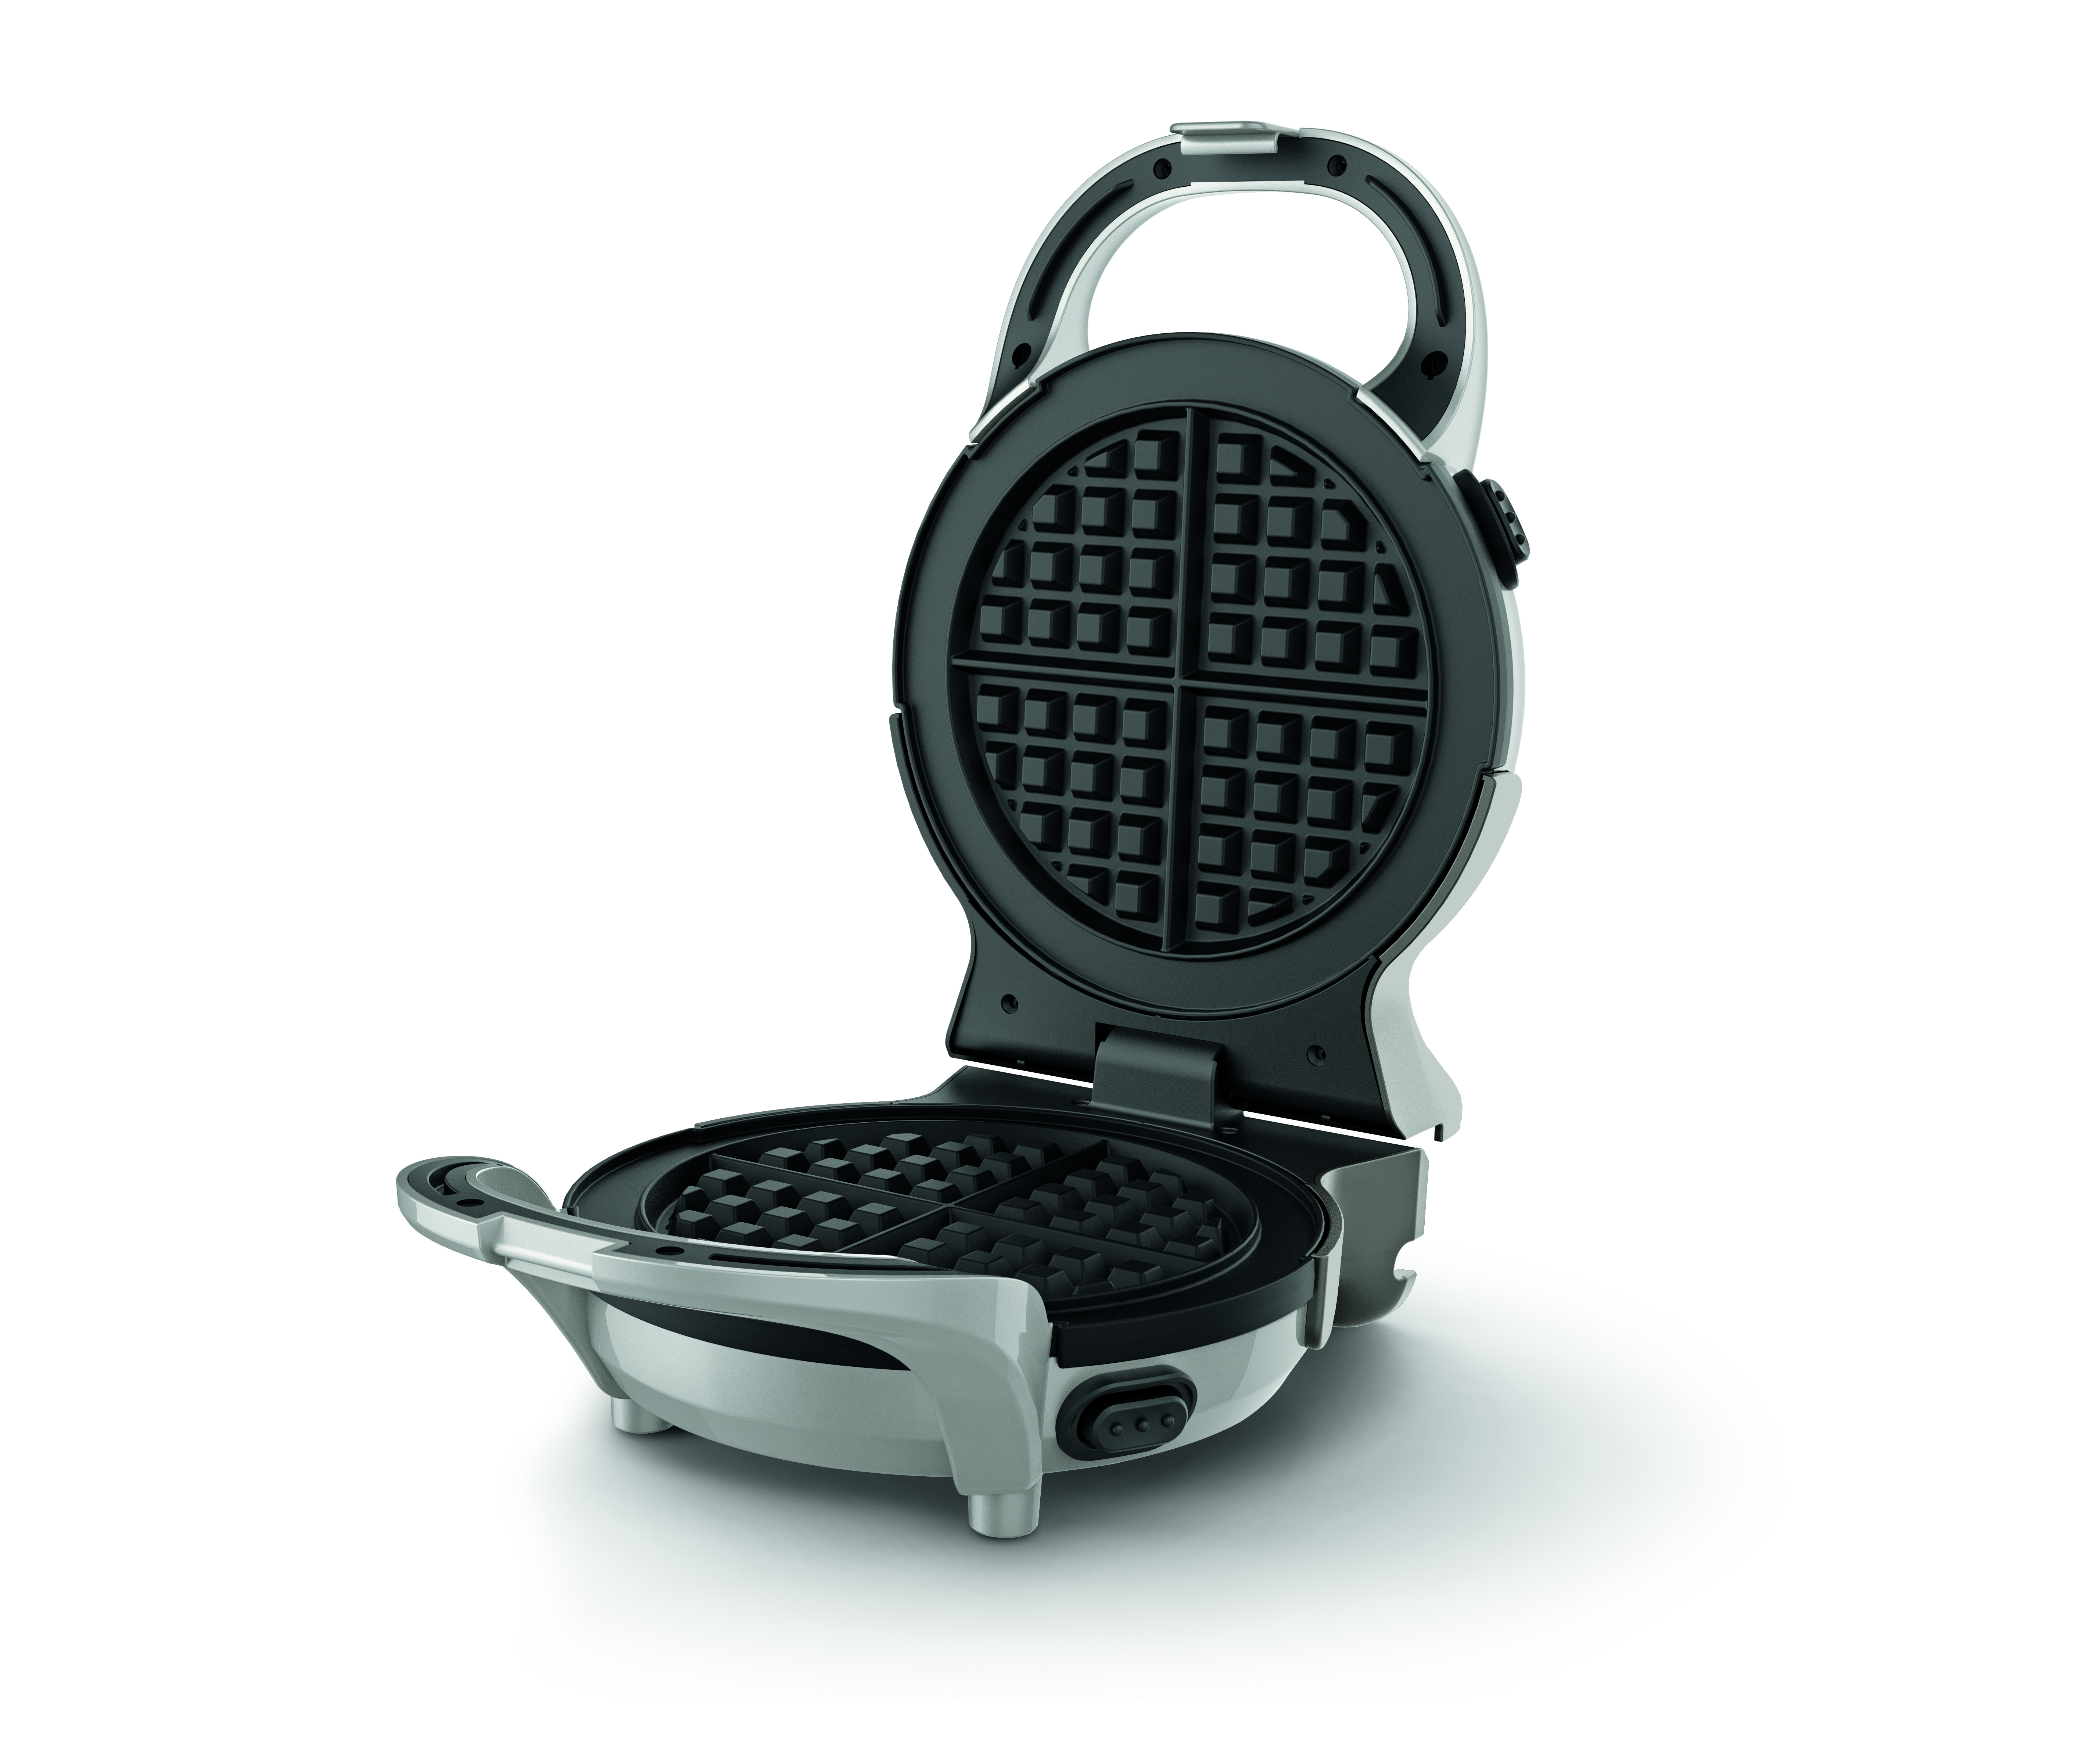 2-in-1 Waffle Maker with Removable Plates